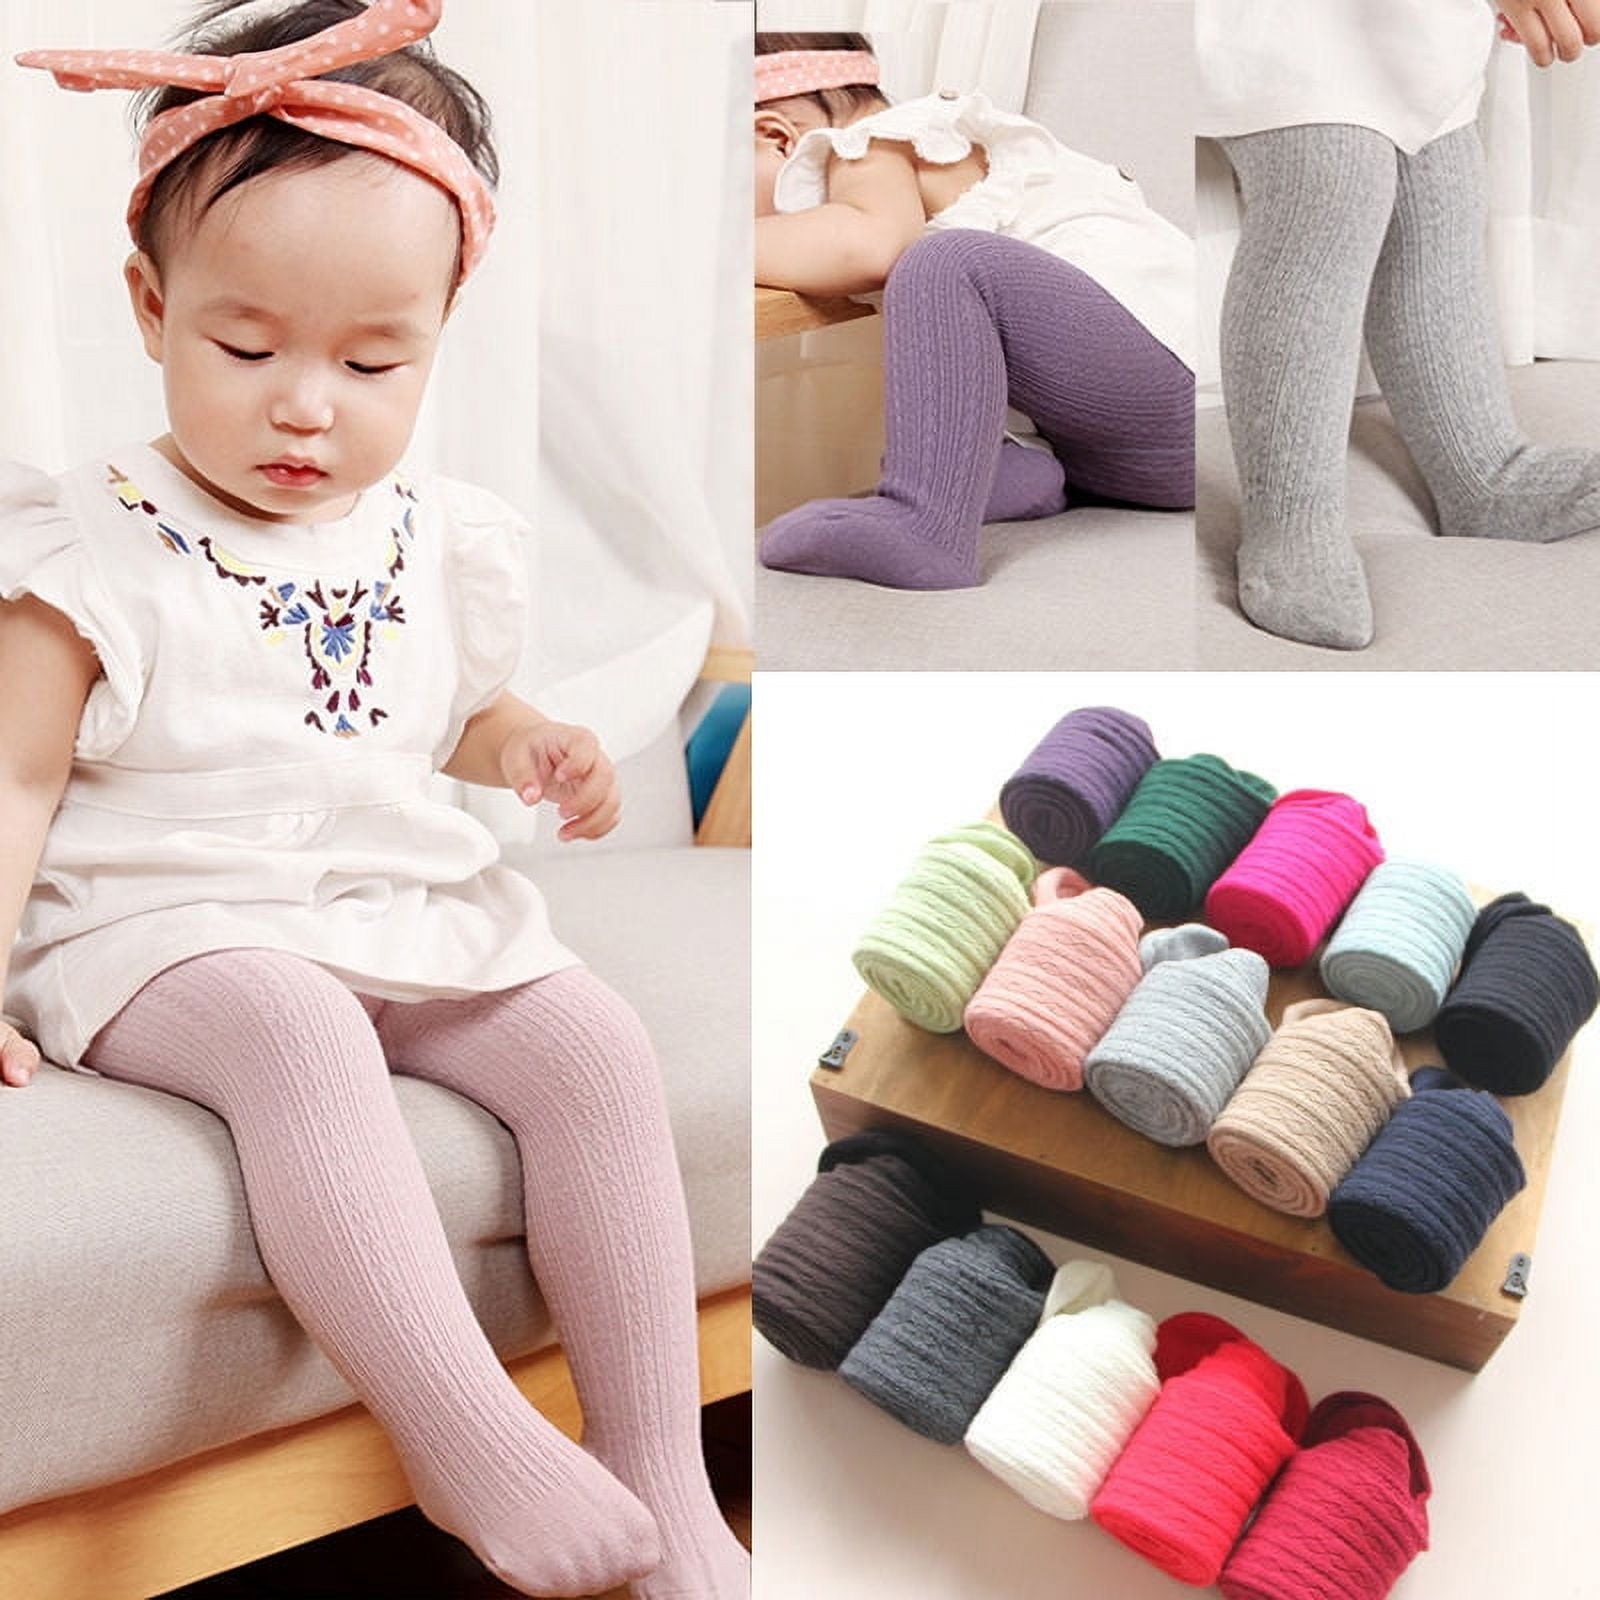 Toddler Little Girls Cotton Tights Footed Spring & Autumn Cable Knit  Legging Pantyhose Stocking